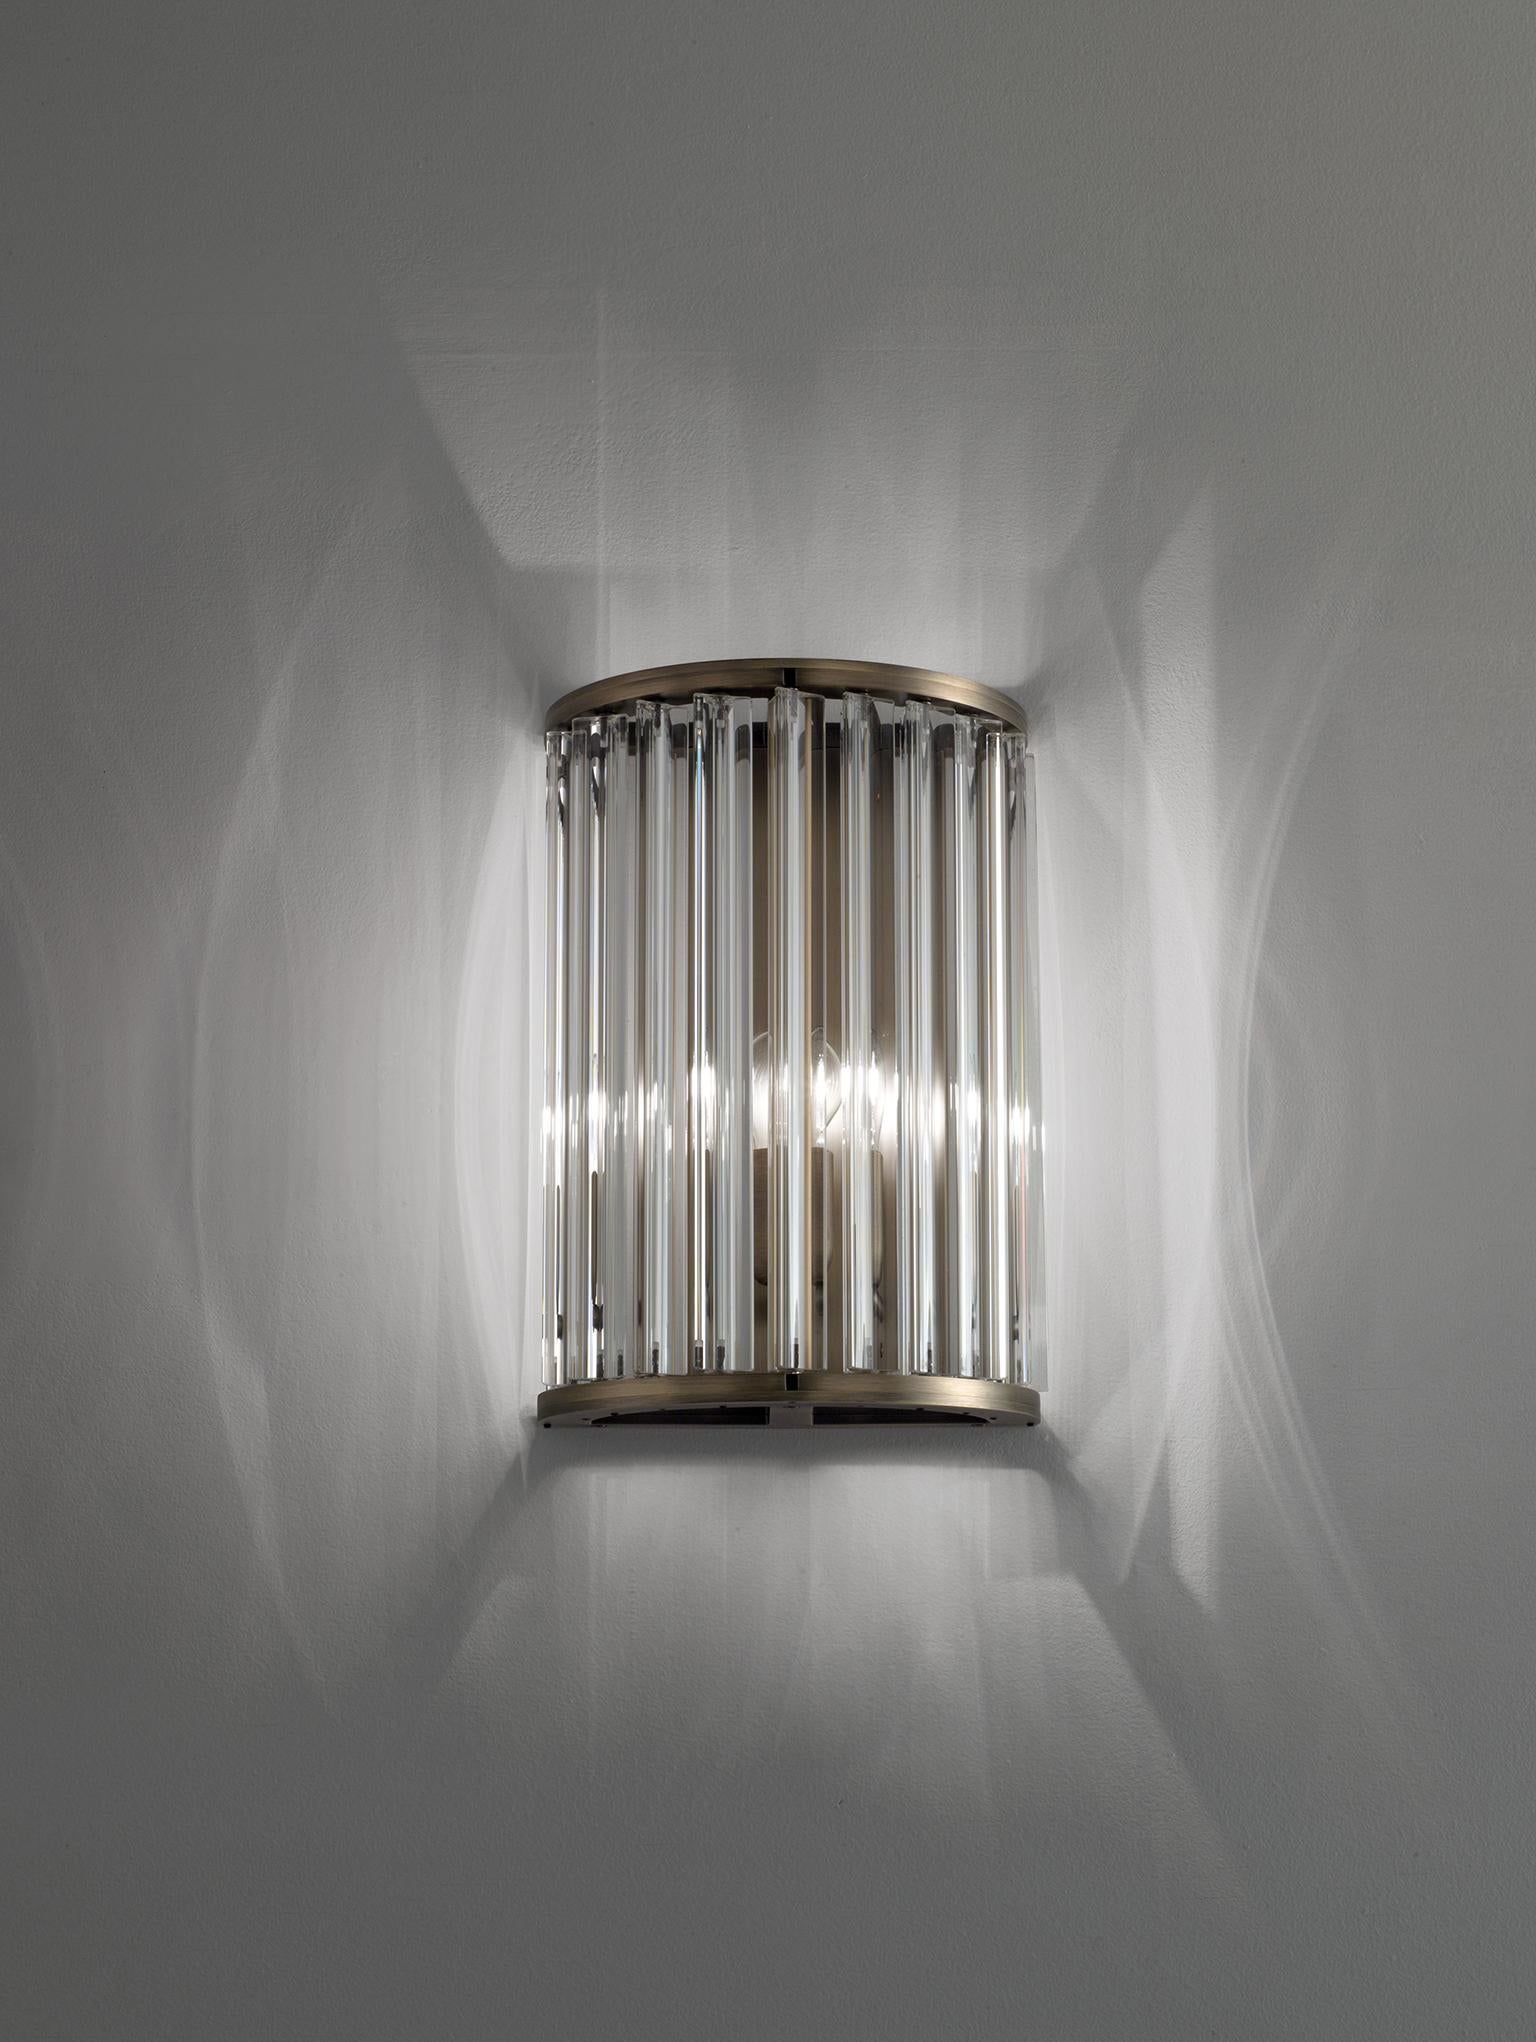 Wall lamp with diffused light. Matte black nickel or light burnished brass structure and crystal, amber or smoke grey Murano blown glass trihedrons. Specifications: Function: Wall Location: Interior Light Emission: Diffused light Light Source: